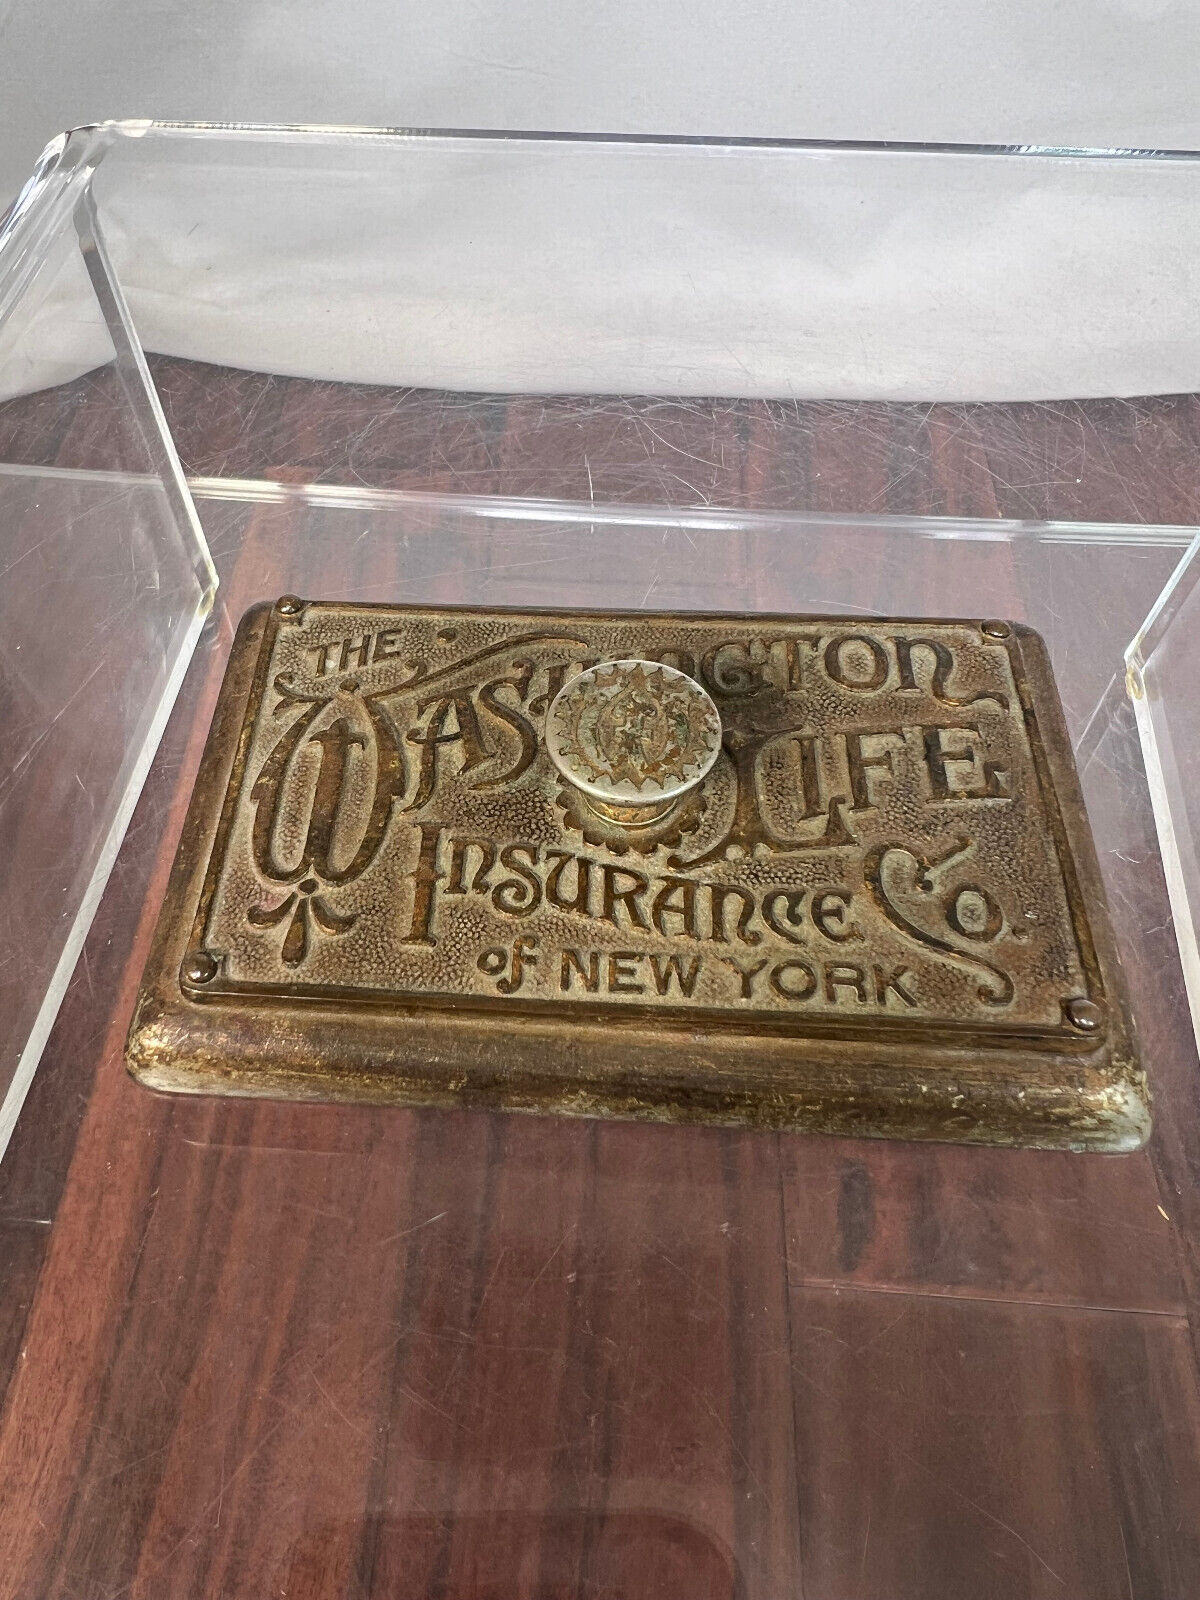 THE WASHINGTON LIFE INSURANCE CO. OF NEW YORK ANTIQUE ADVERTISING PAPERWEIGHT